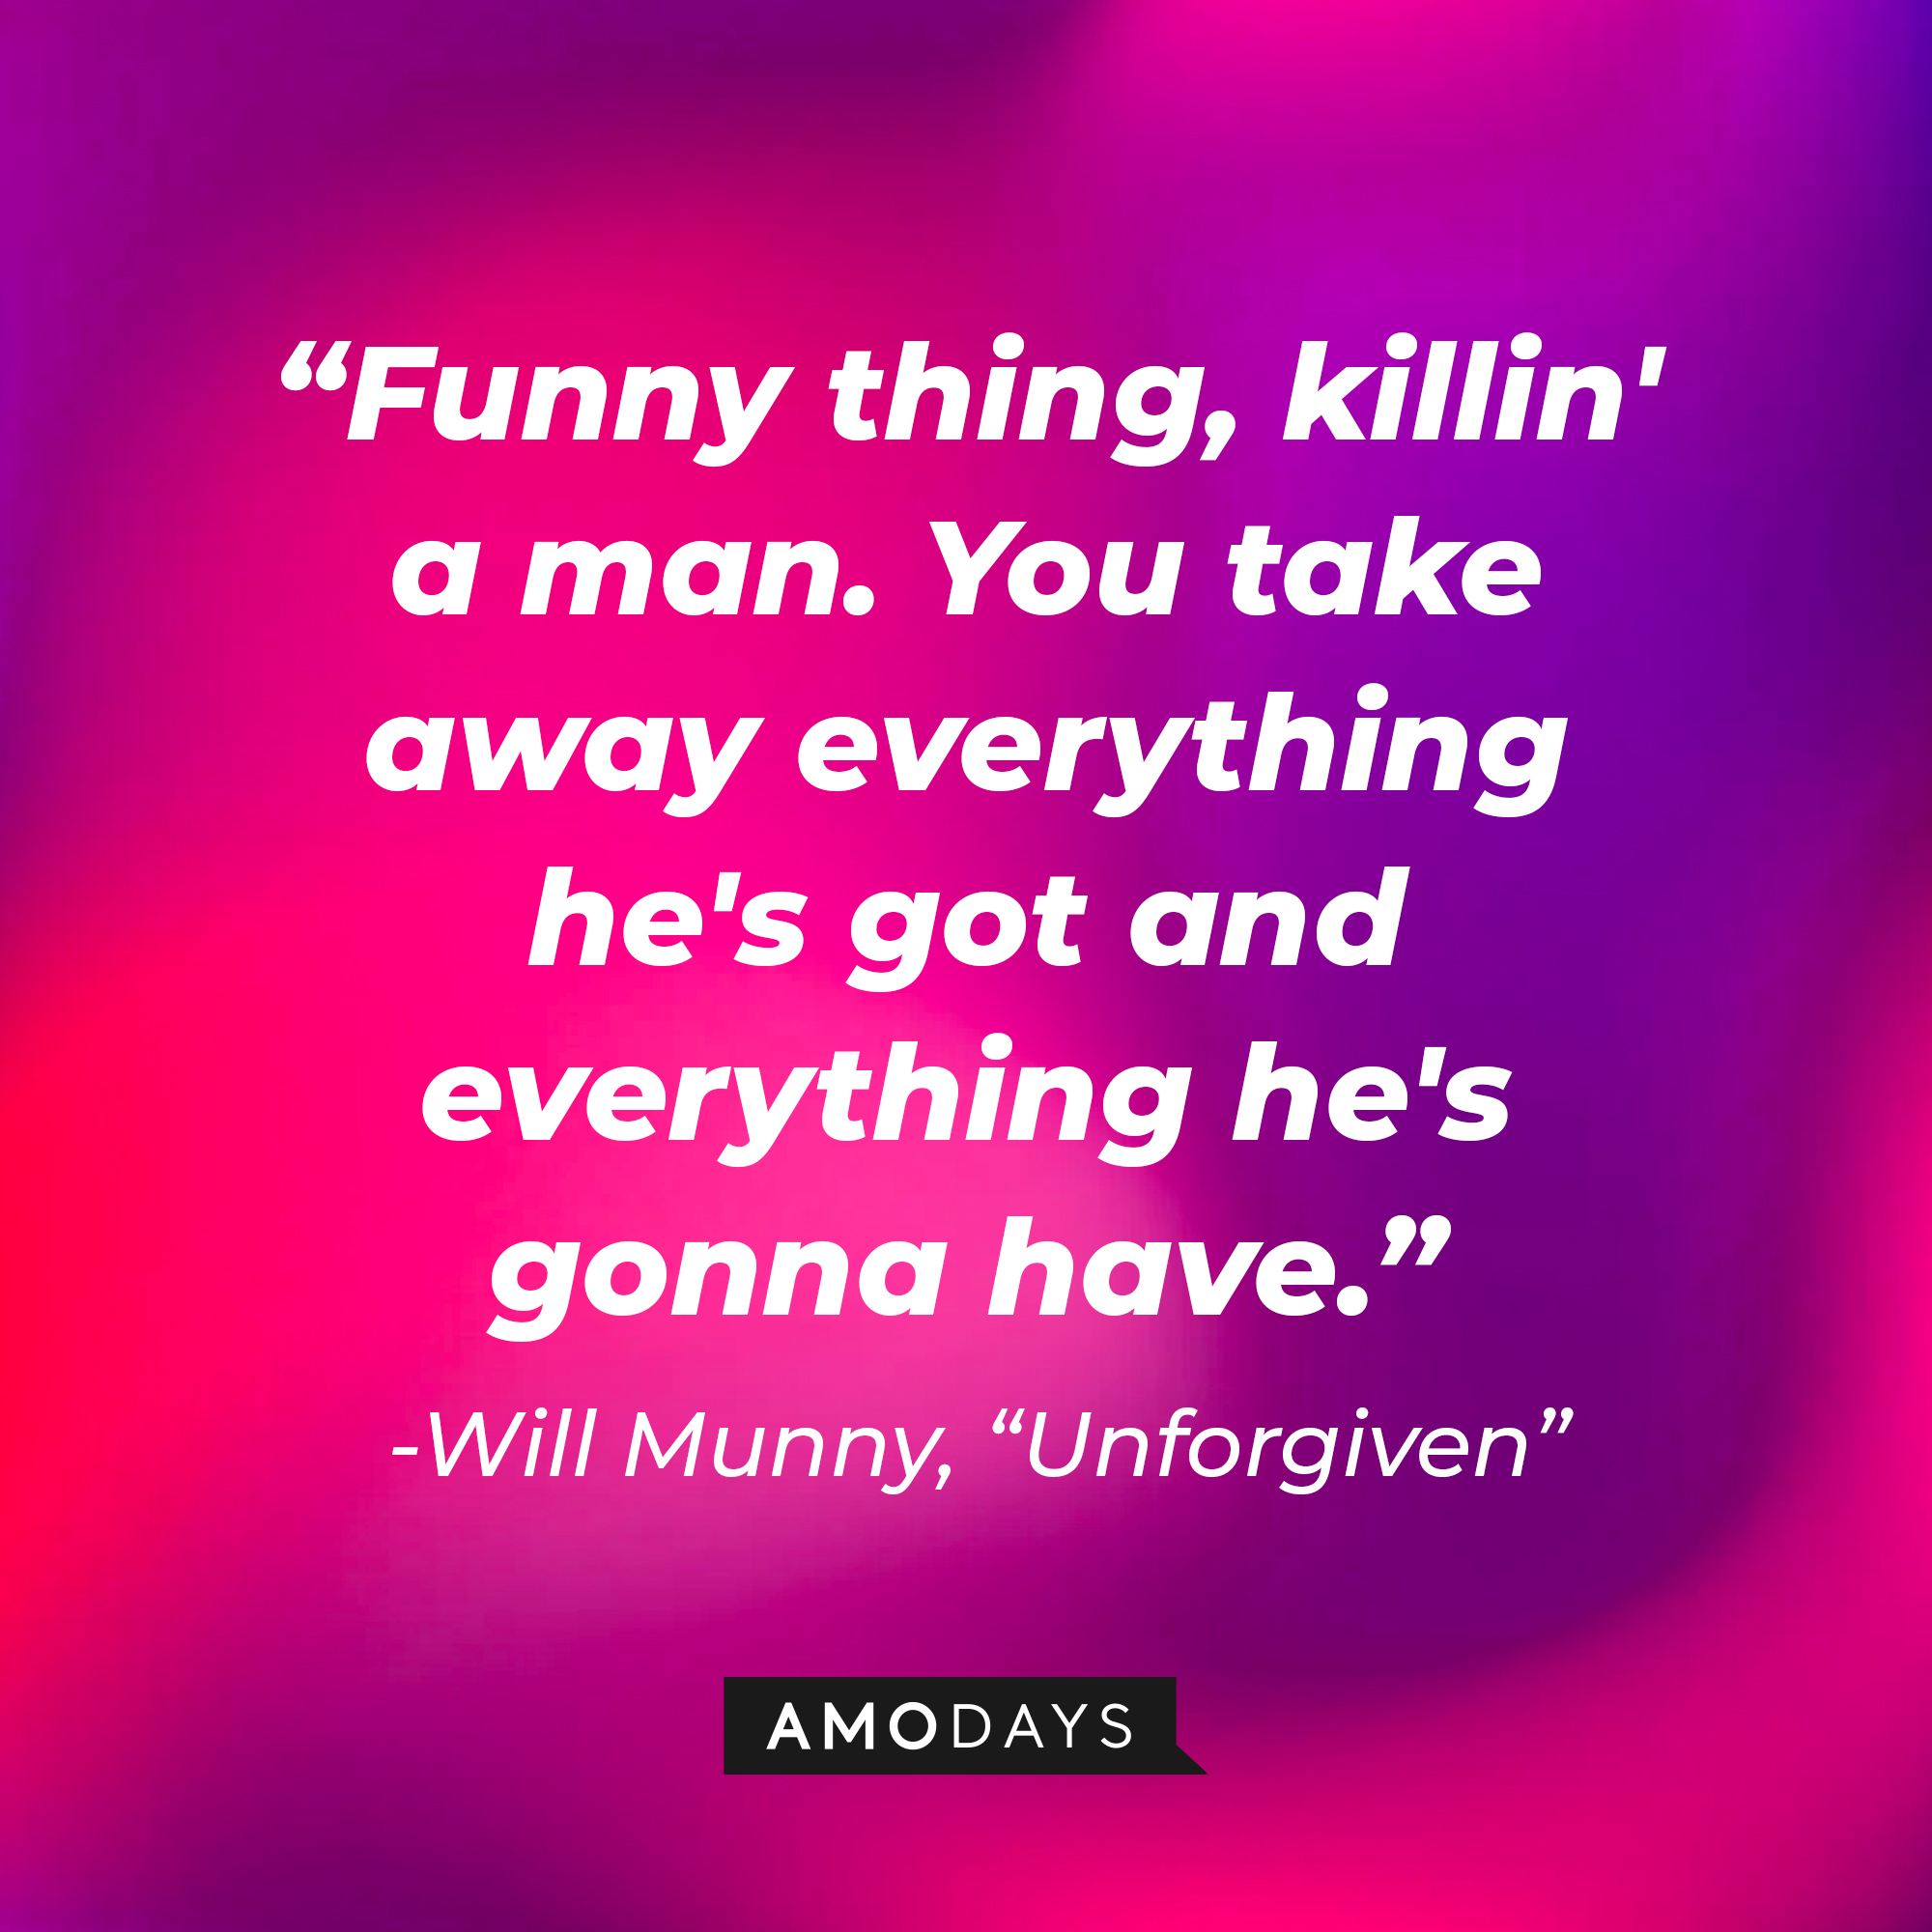 William Munny's quote in "Unforgiven:" "Funny thing, killin' a man. You take away everything he's got and everything he's gonna have."  | Source: AmoDays